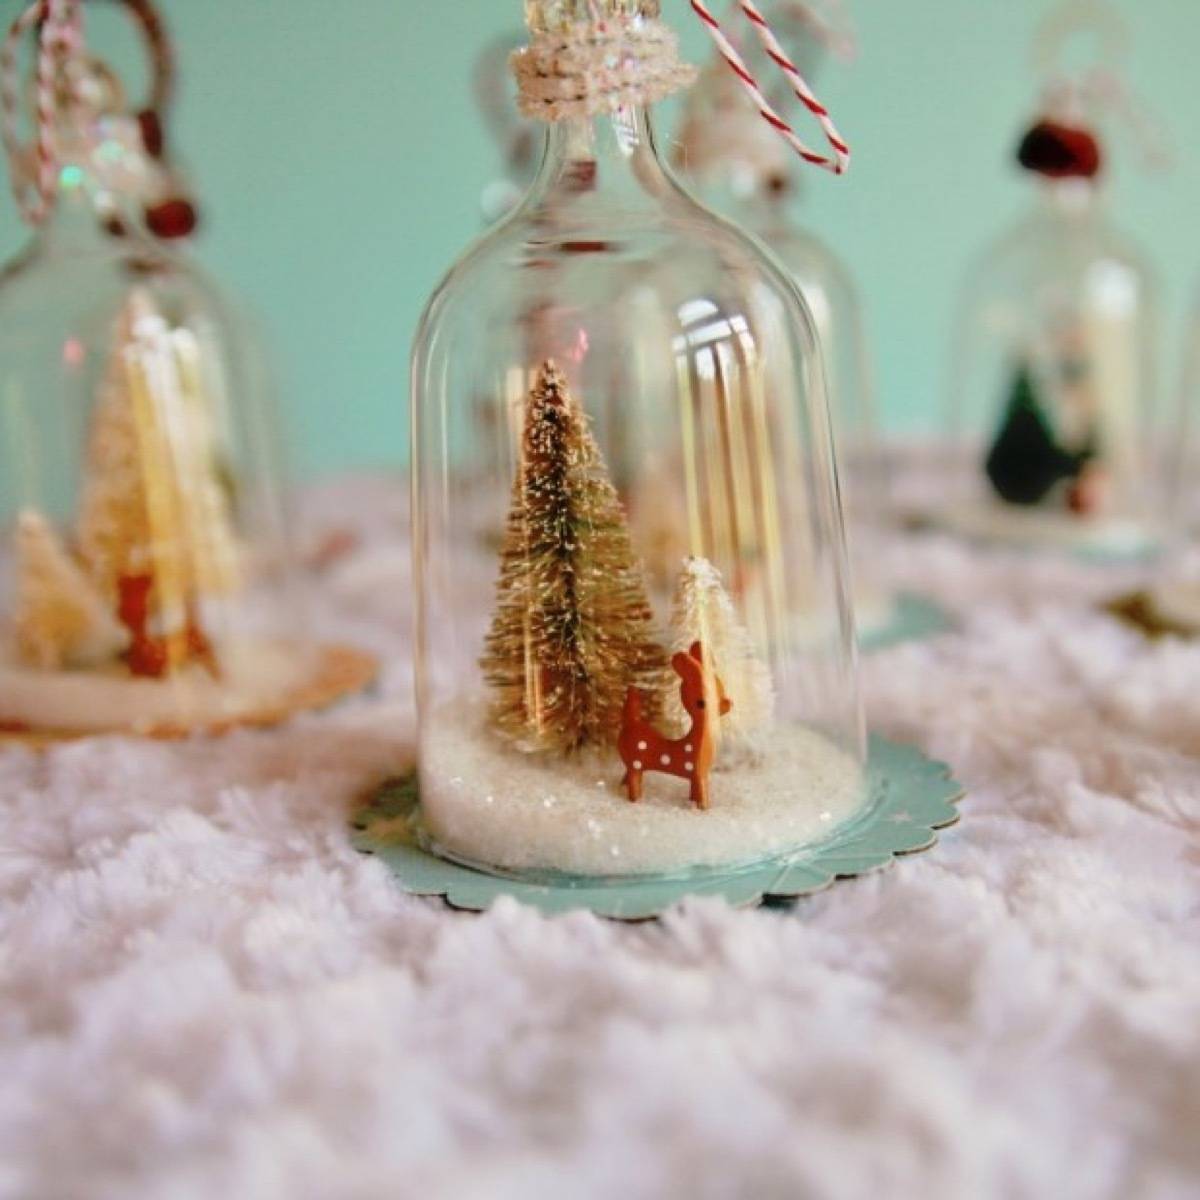 Adorable bell glass ornament